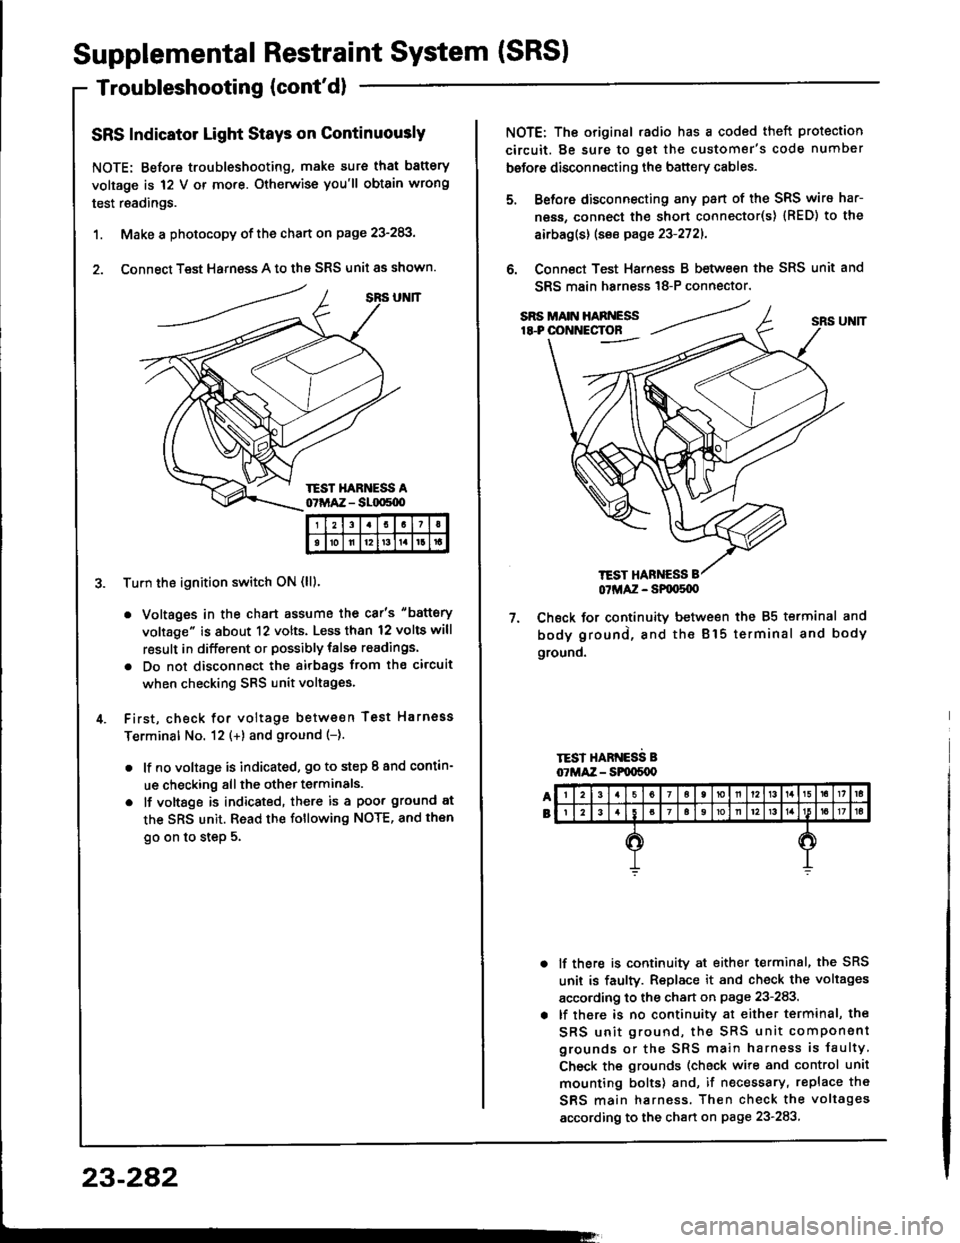 HONDA INTEGRA 1994 4.G Repair Manual Supplemental Restraint System (SRSI
Troubleshooting (contdl
SRS Indicator Light Stays on Continuously
NOTE: Before troubleshooting, make sure that battery
voltage is 12 V or mo.e. Otherwise youll ob